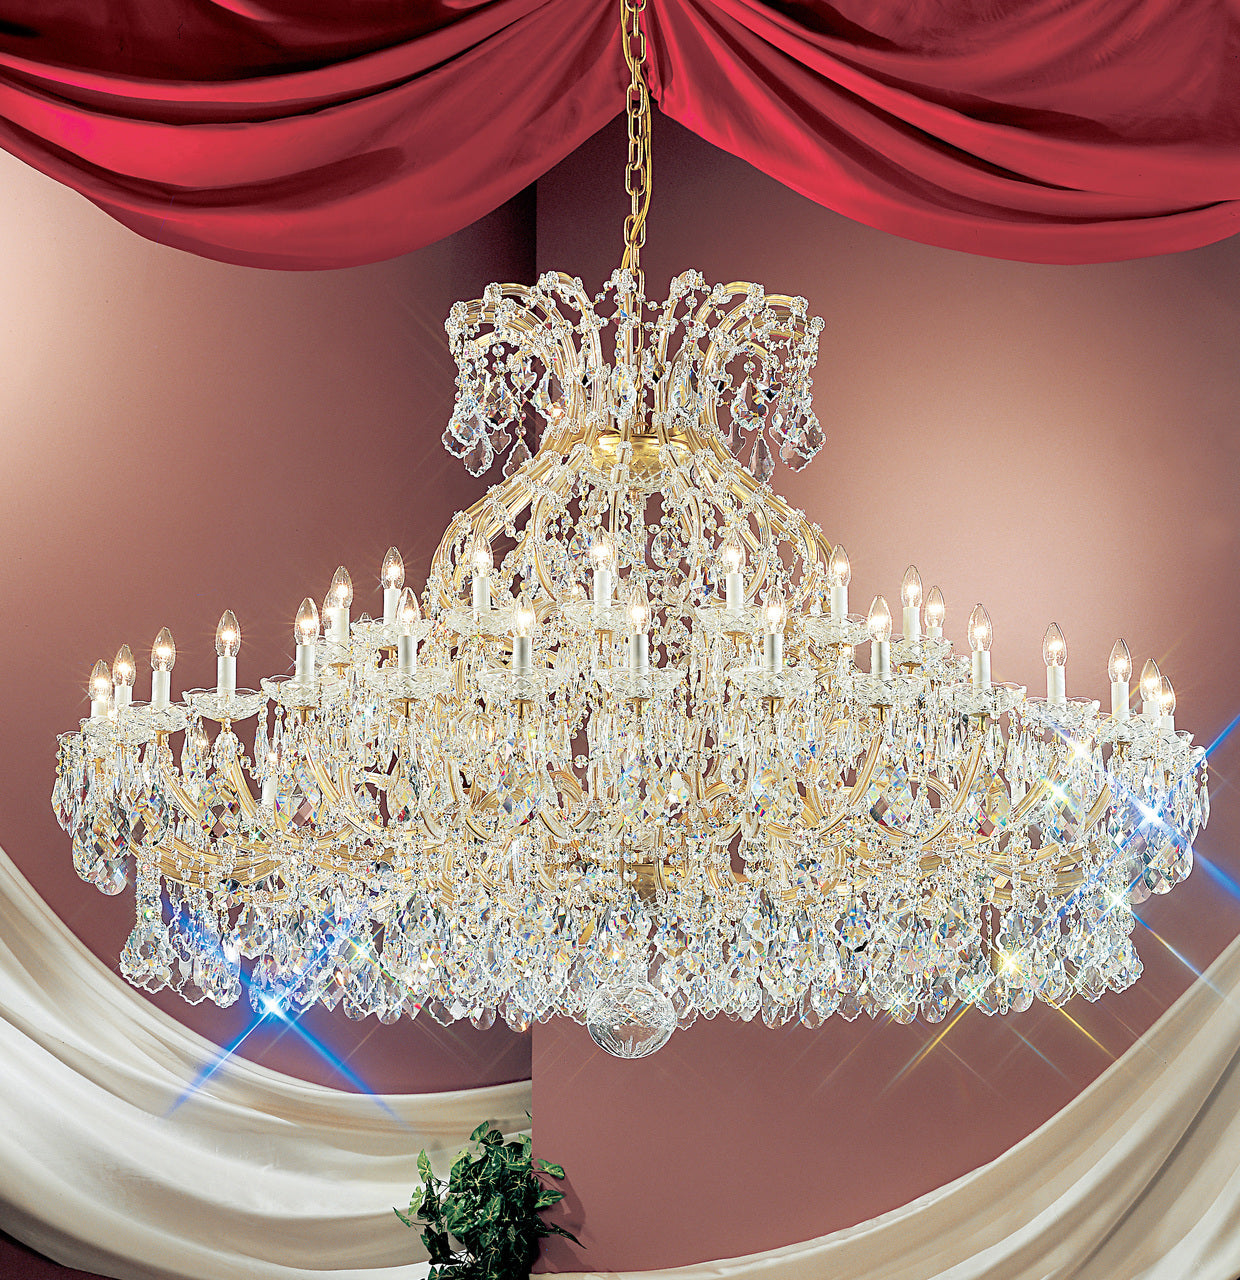 Classic Lighting 8168 OWG SC Maria Theresa Traditional Crystal Chandelier in Olde World Gold (Imported from Italy)